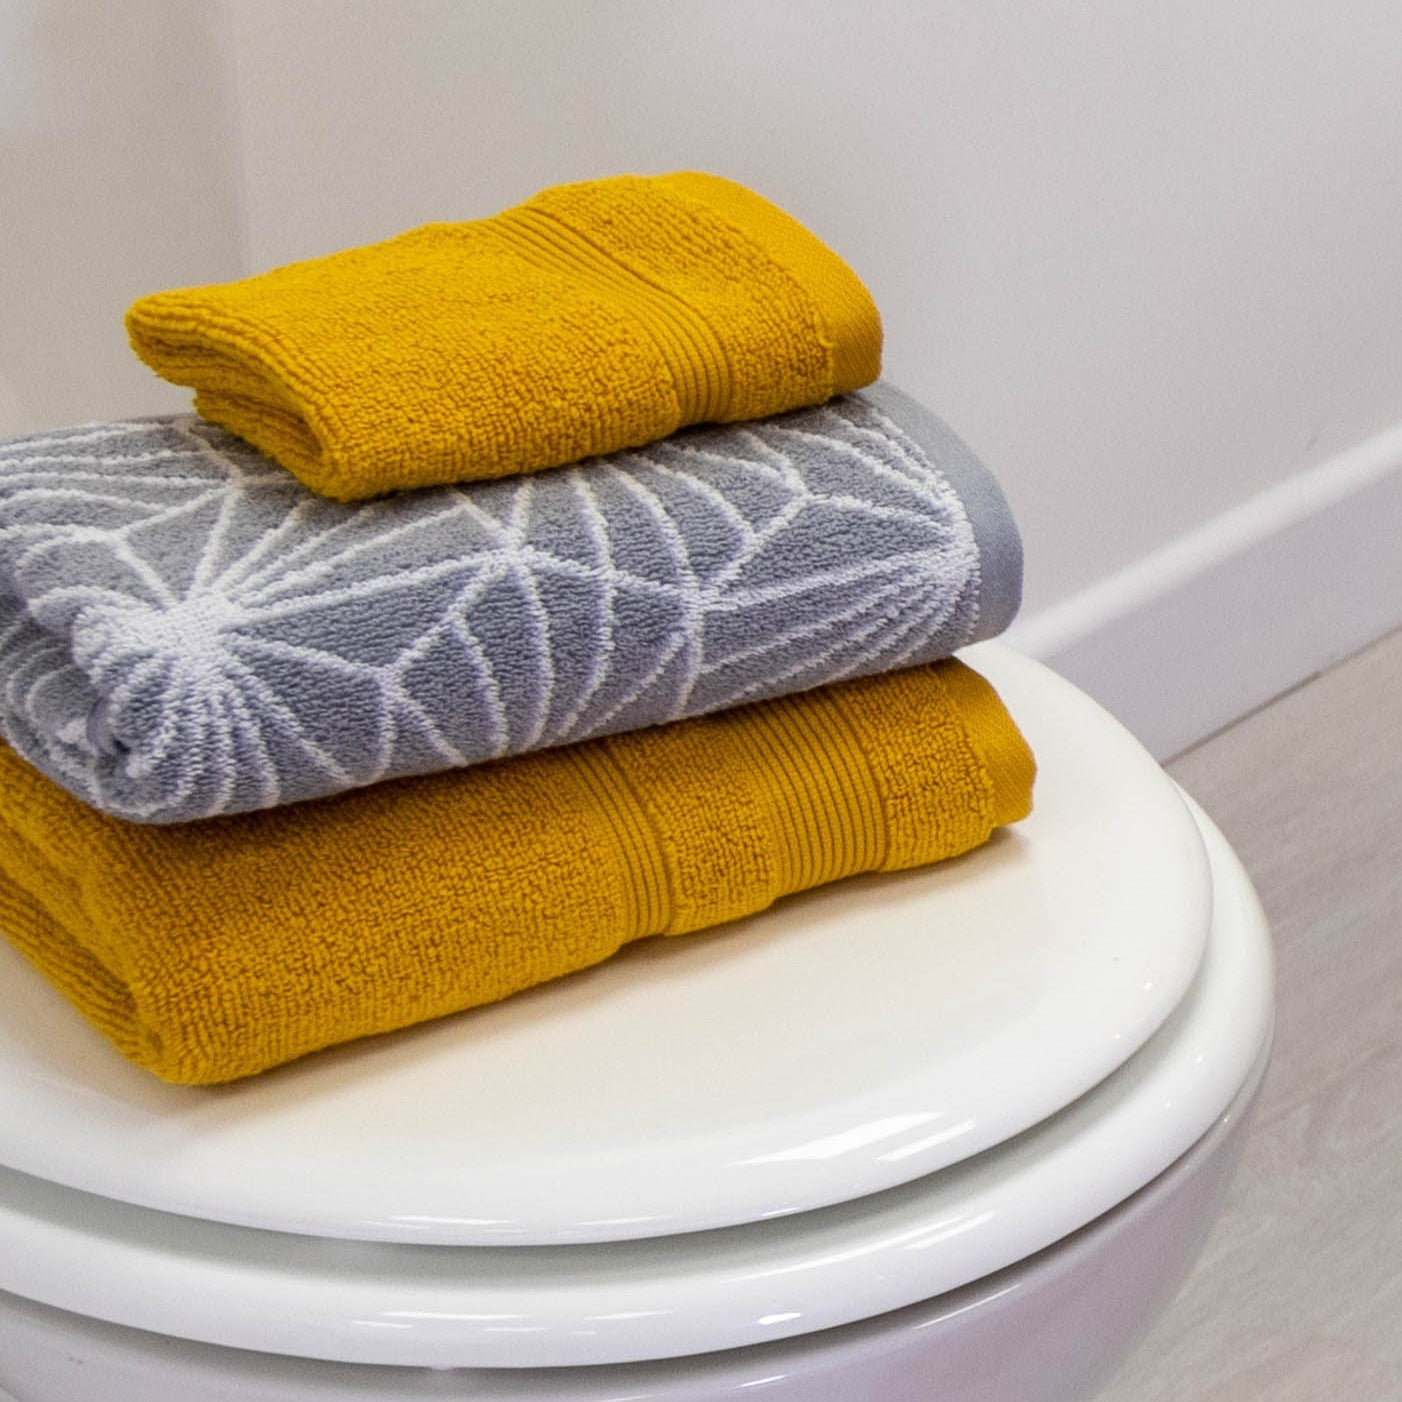 Plain vs Patterned Towels - What's best for your Bathroom?